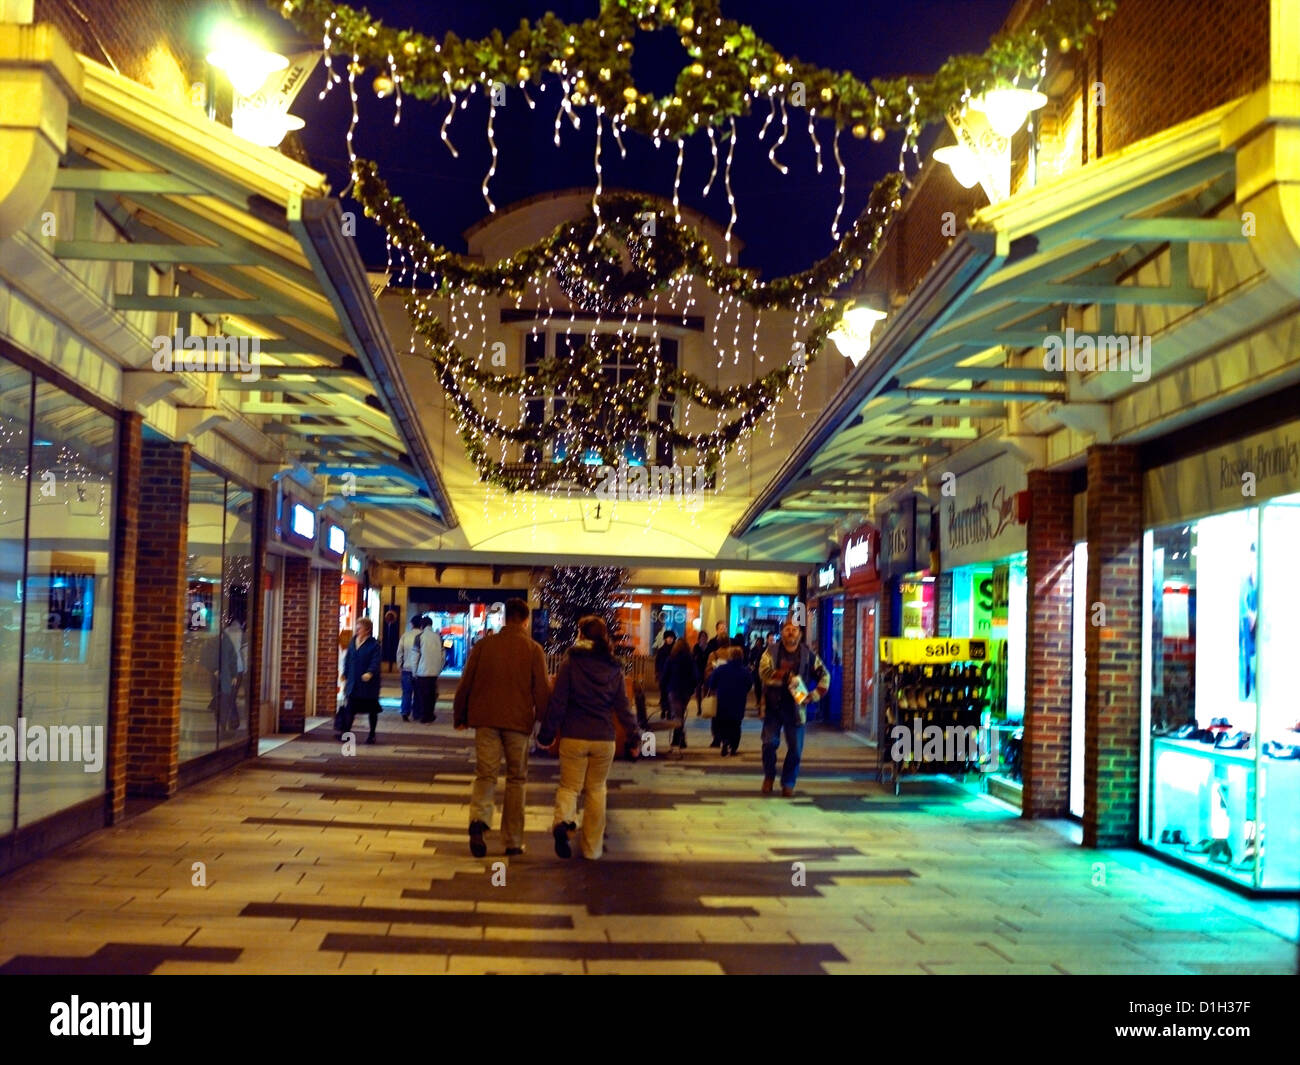 Beautiful Christmas Decoration in the Gardens Mall. Editorial Stock Image -  Image of carnival, architecture: 135158254